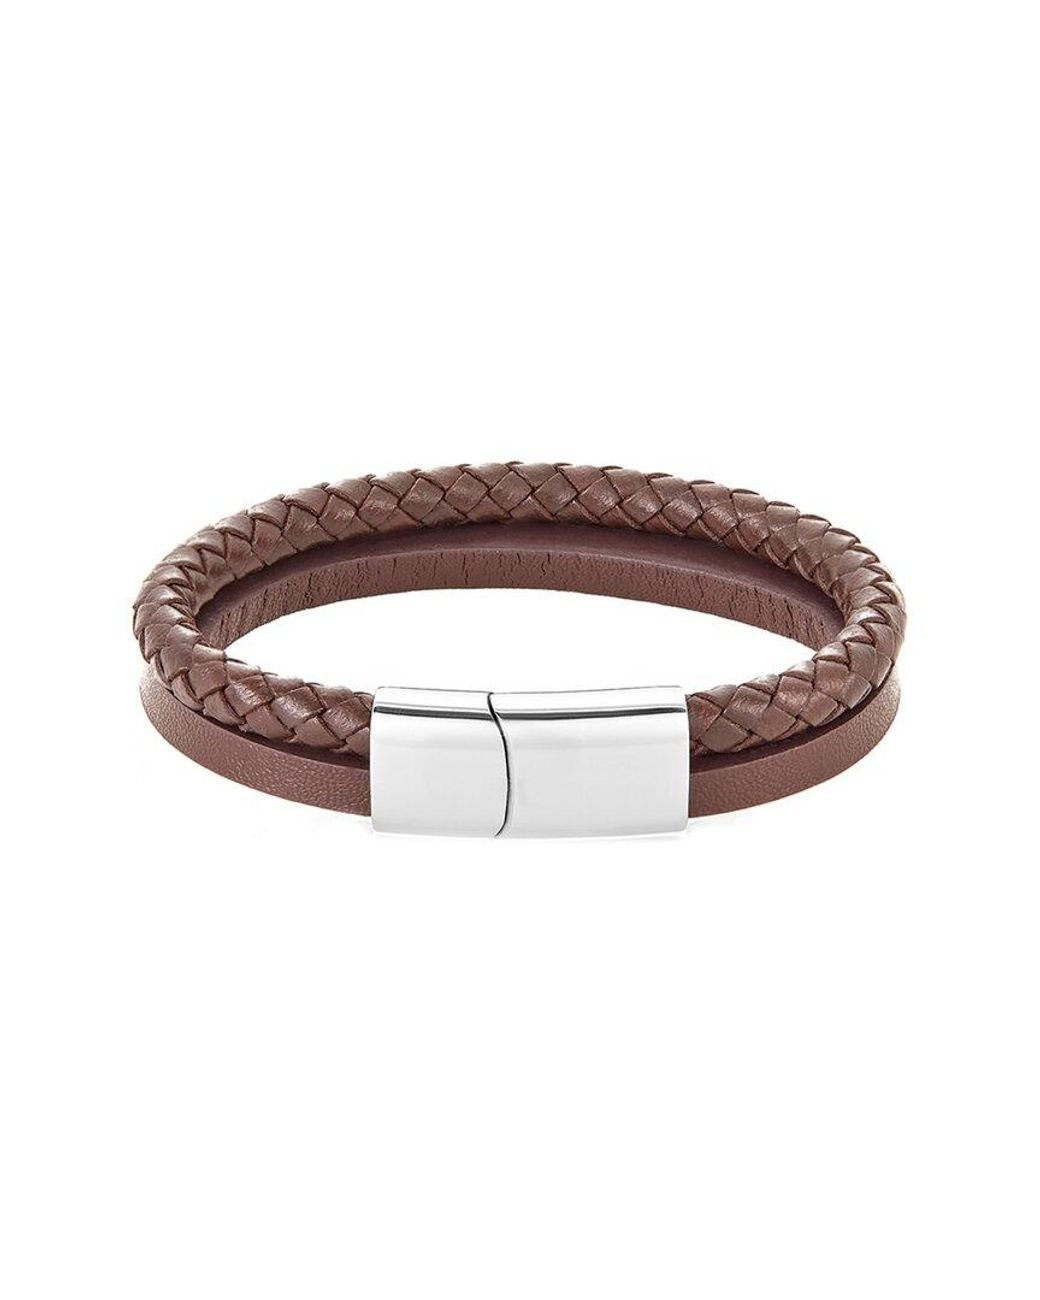 Adornia Stainless Steel Leather Bracelet in Brown for Men - Lyst